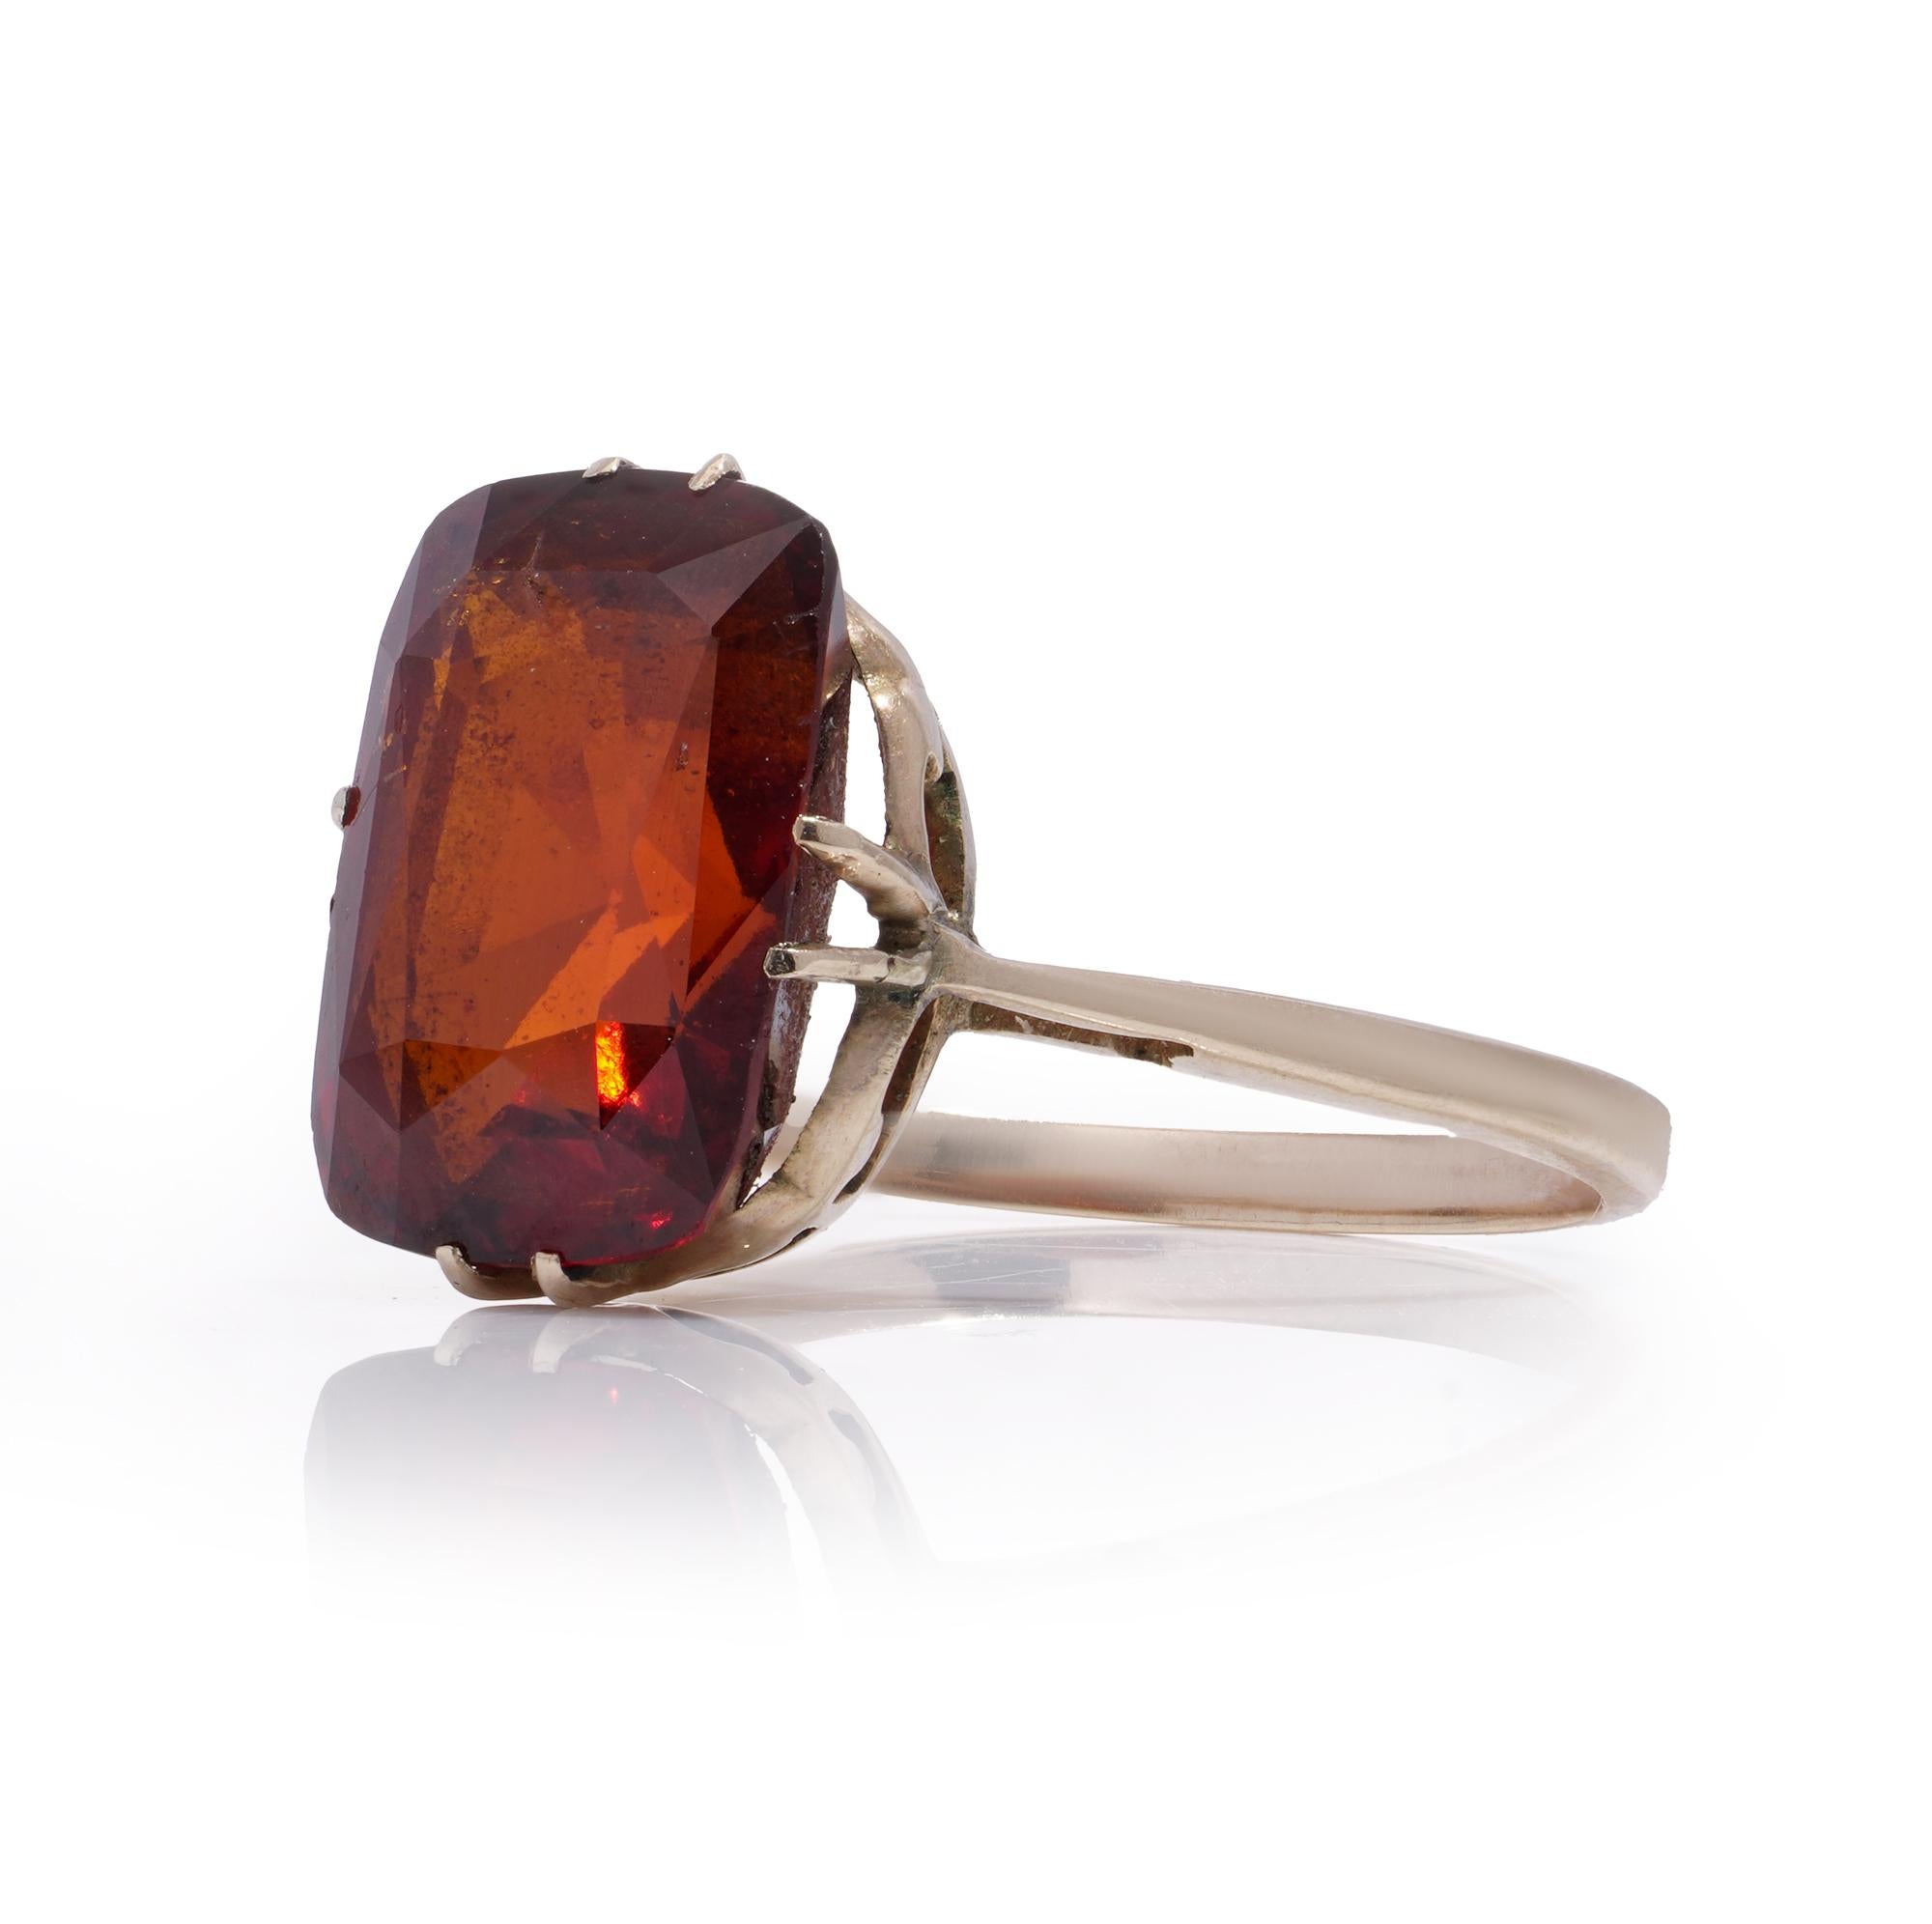 Antique Victorian 9kt rose gold cushion -  cut orange citrine solitaire ring.
Made in Circa 1900s
X-Ray tested positive for 9kt gold.

Dimensions -
Finger Size (UK) = O (EU) = 56 (US) = 7.5
Weight: 3.00 grams

Orange citrine -
Cut: Cushion
Quantity: